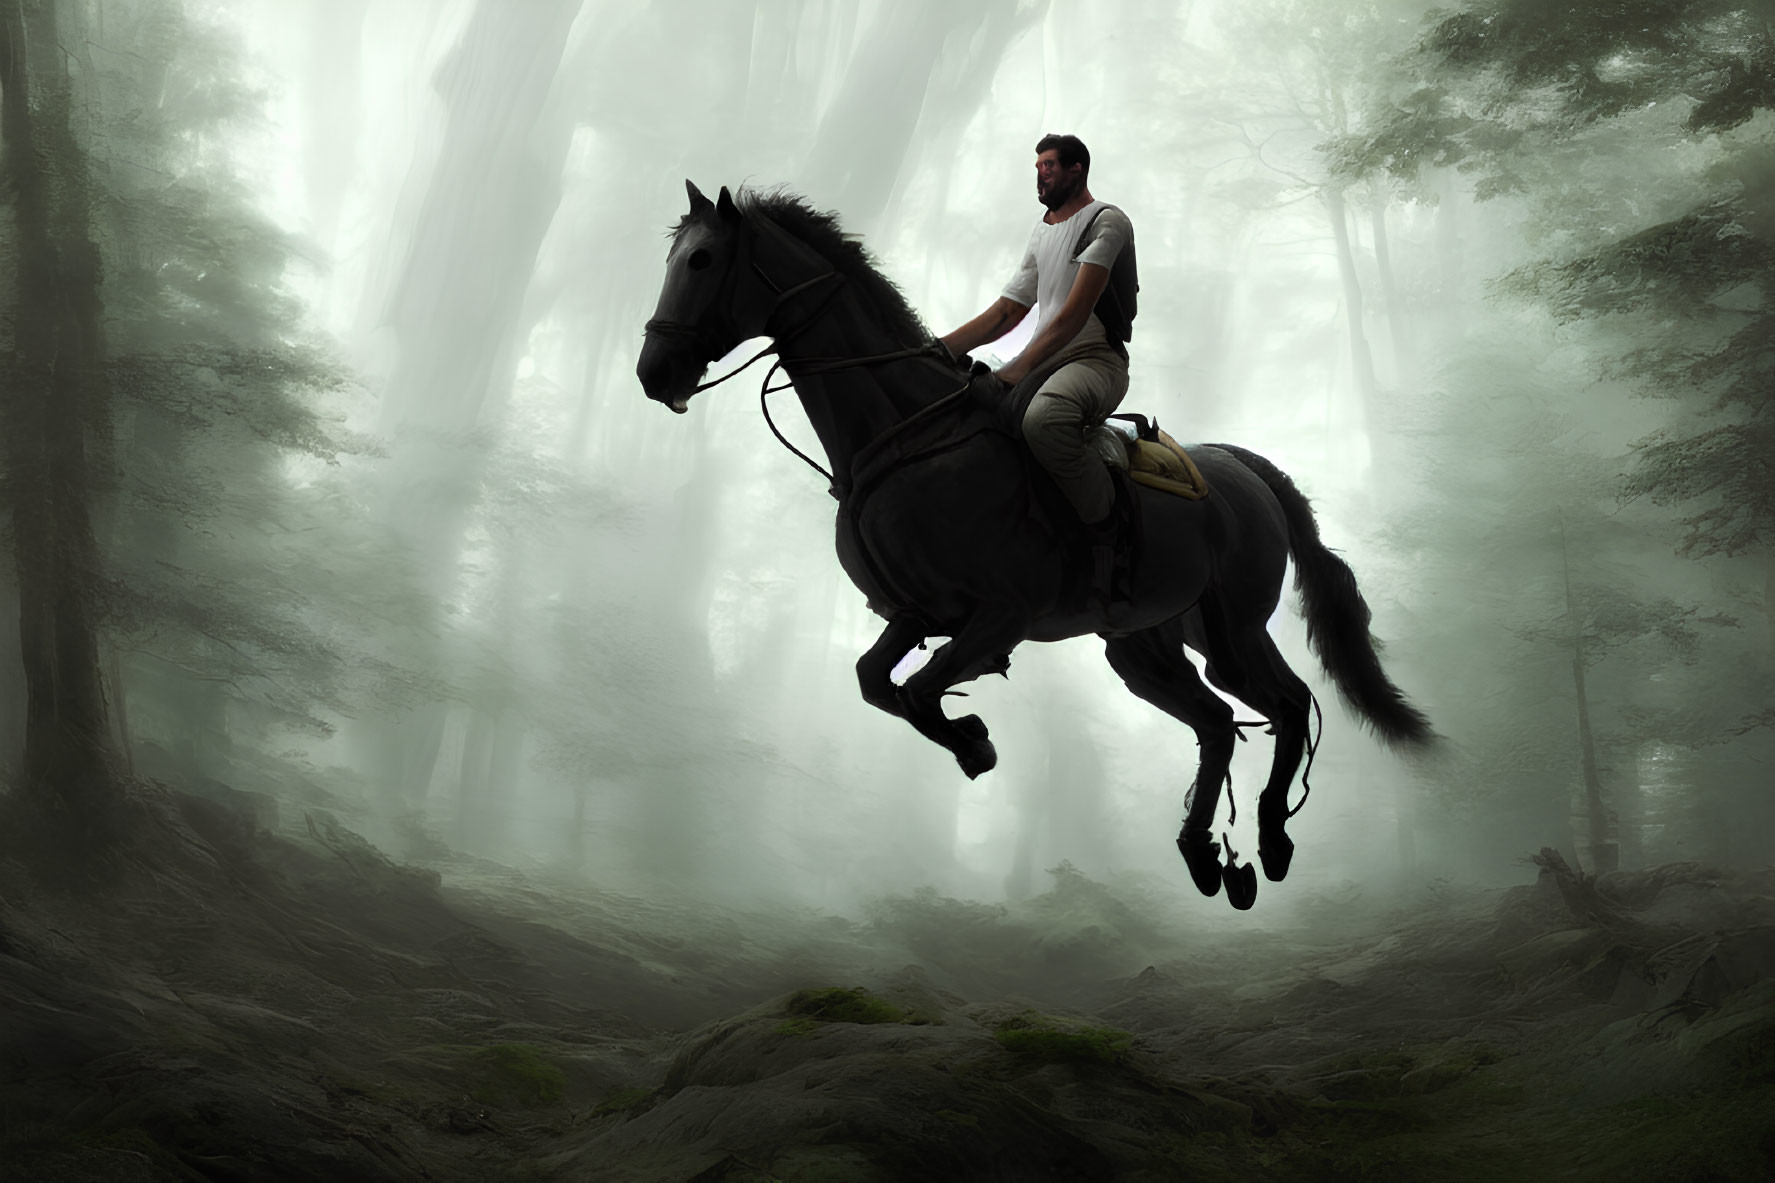 Man riding black horse through misty forest with horse mid-gallop above ground among dense trees